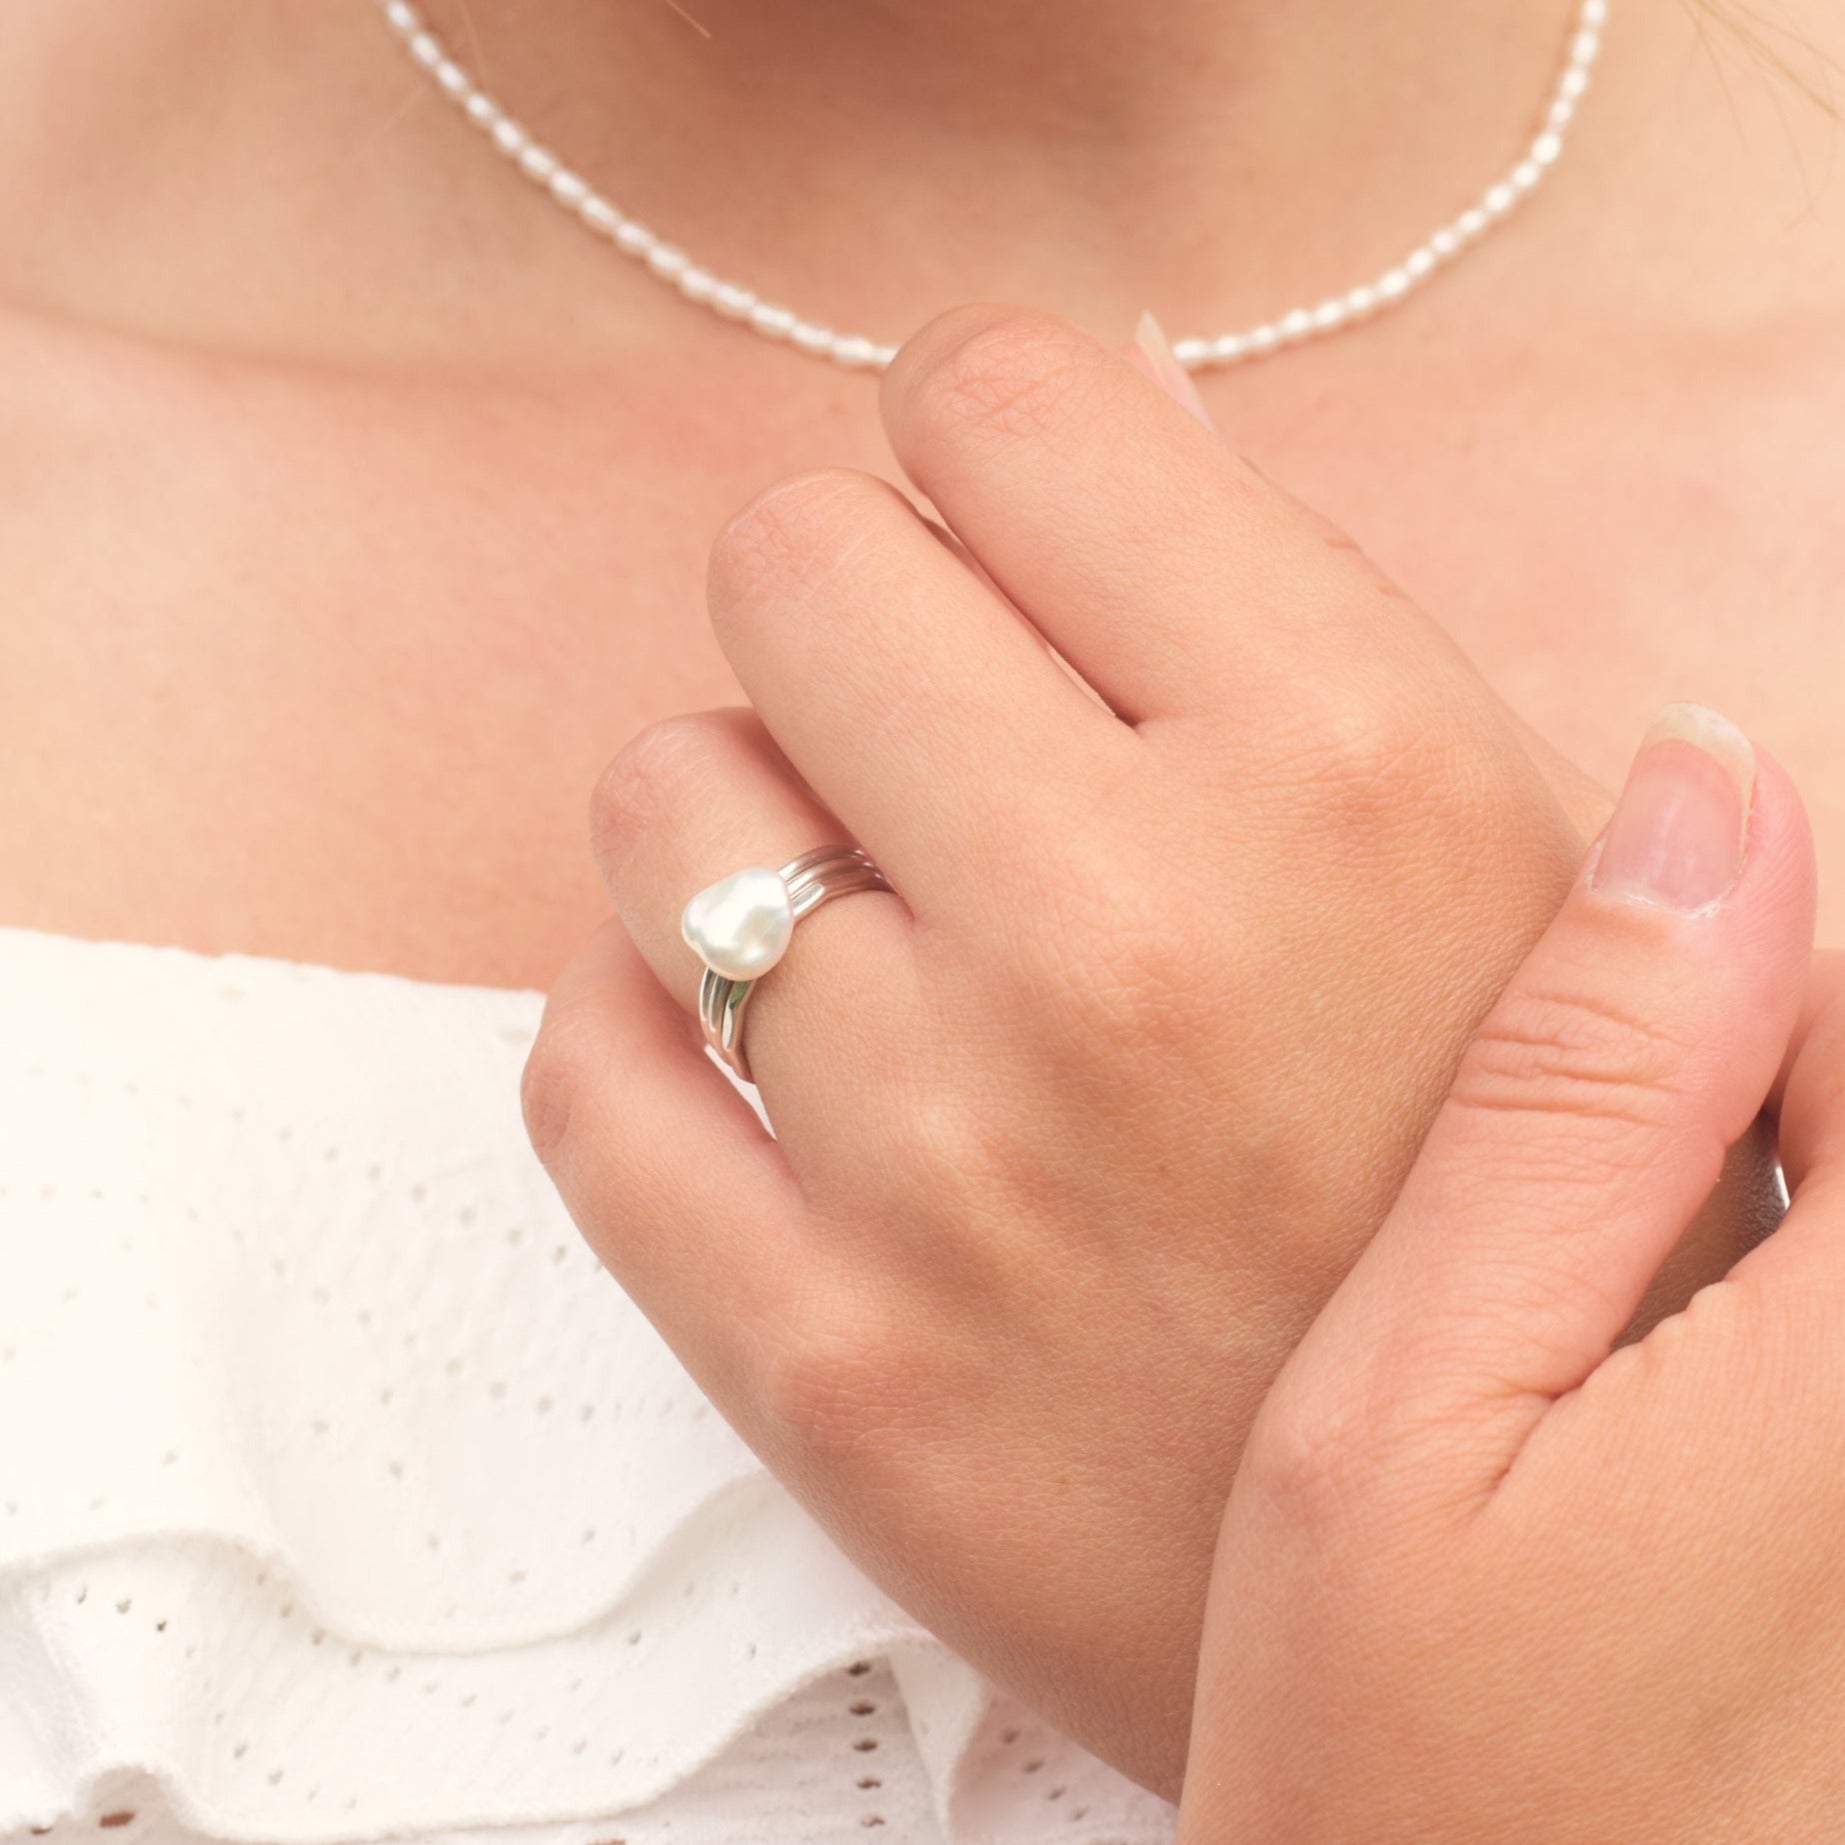 Model holding hands together wearing stack of silver rings